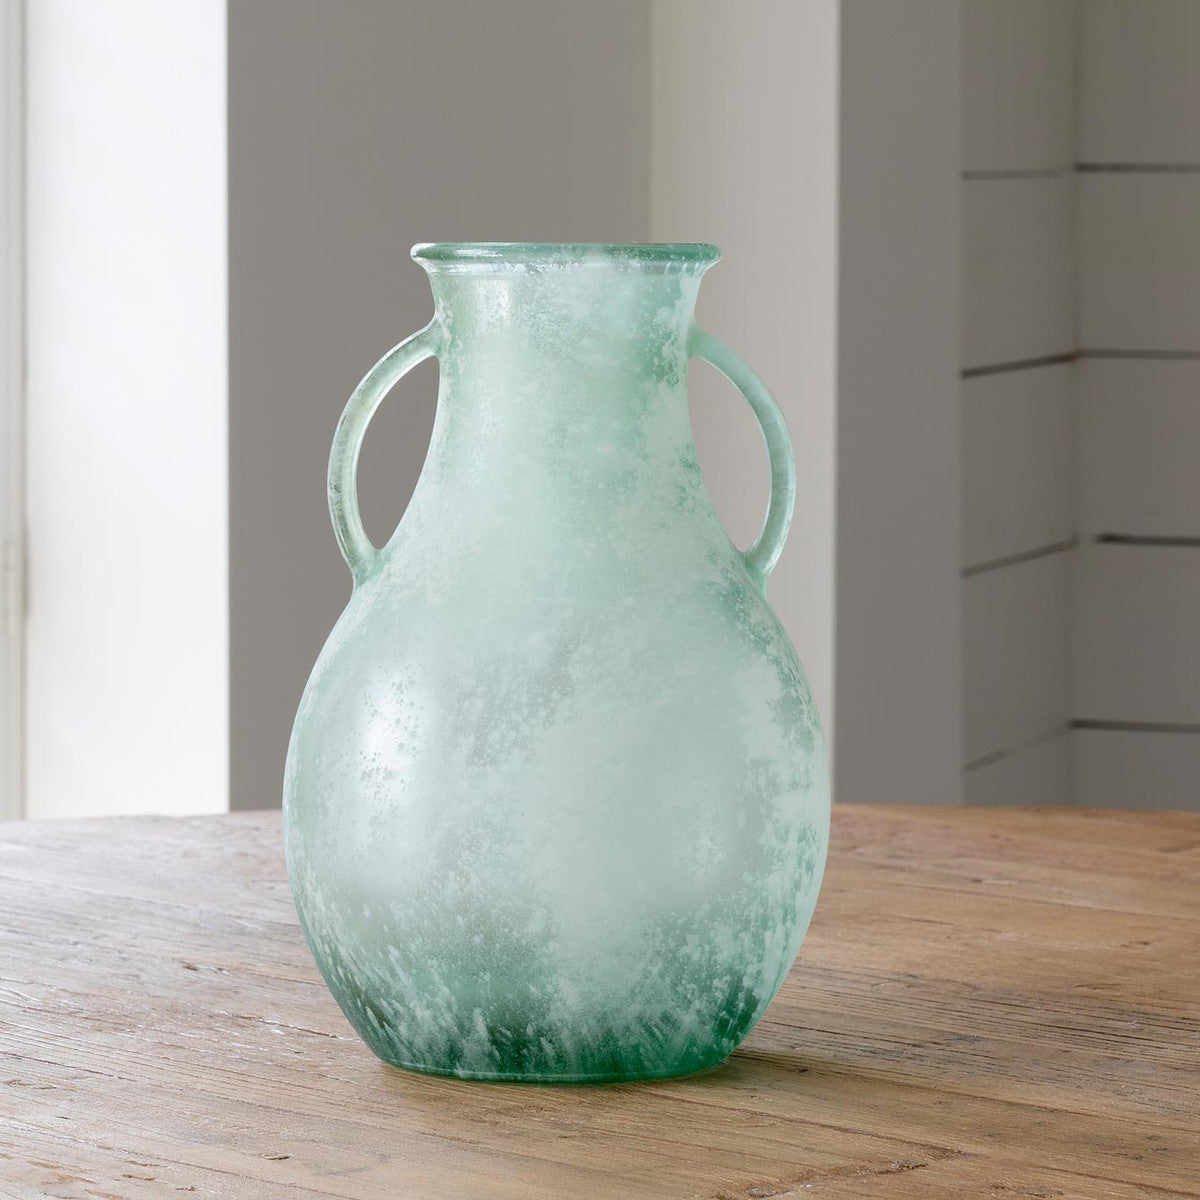 Park Hill Collection Glass Vase With Handles, Frosted Seafoam, Large